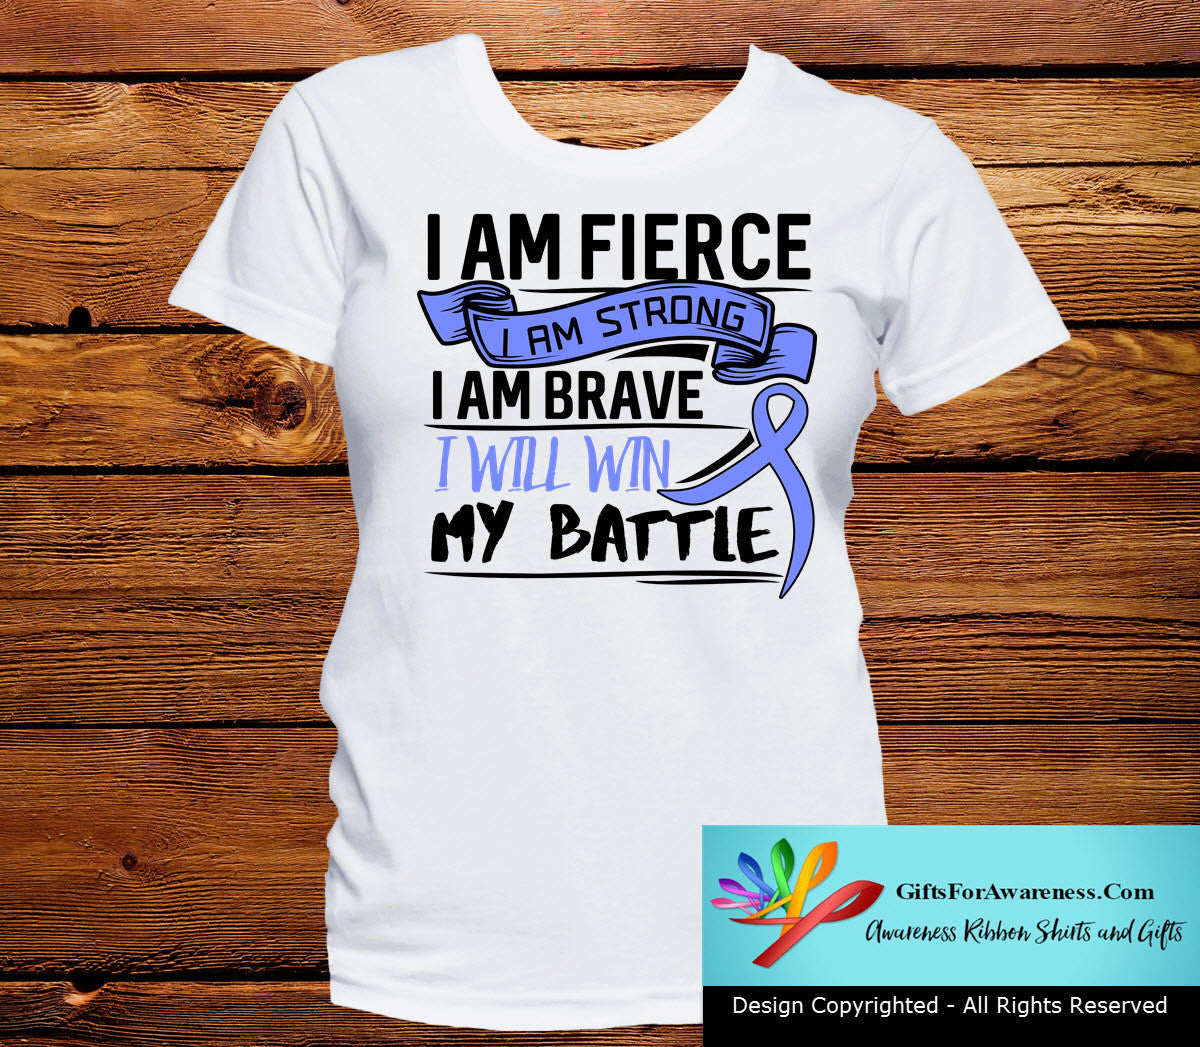 Esophageal Cancer I Am Fierce Strong and Brave Shirts - GiftsForAwareness